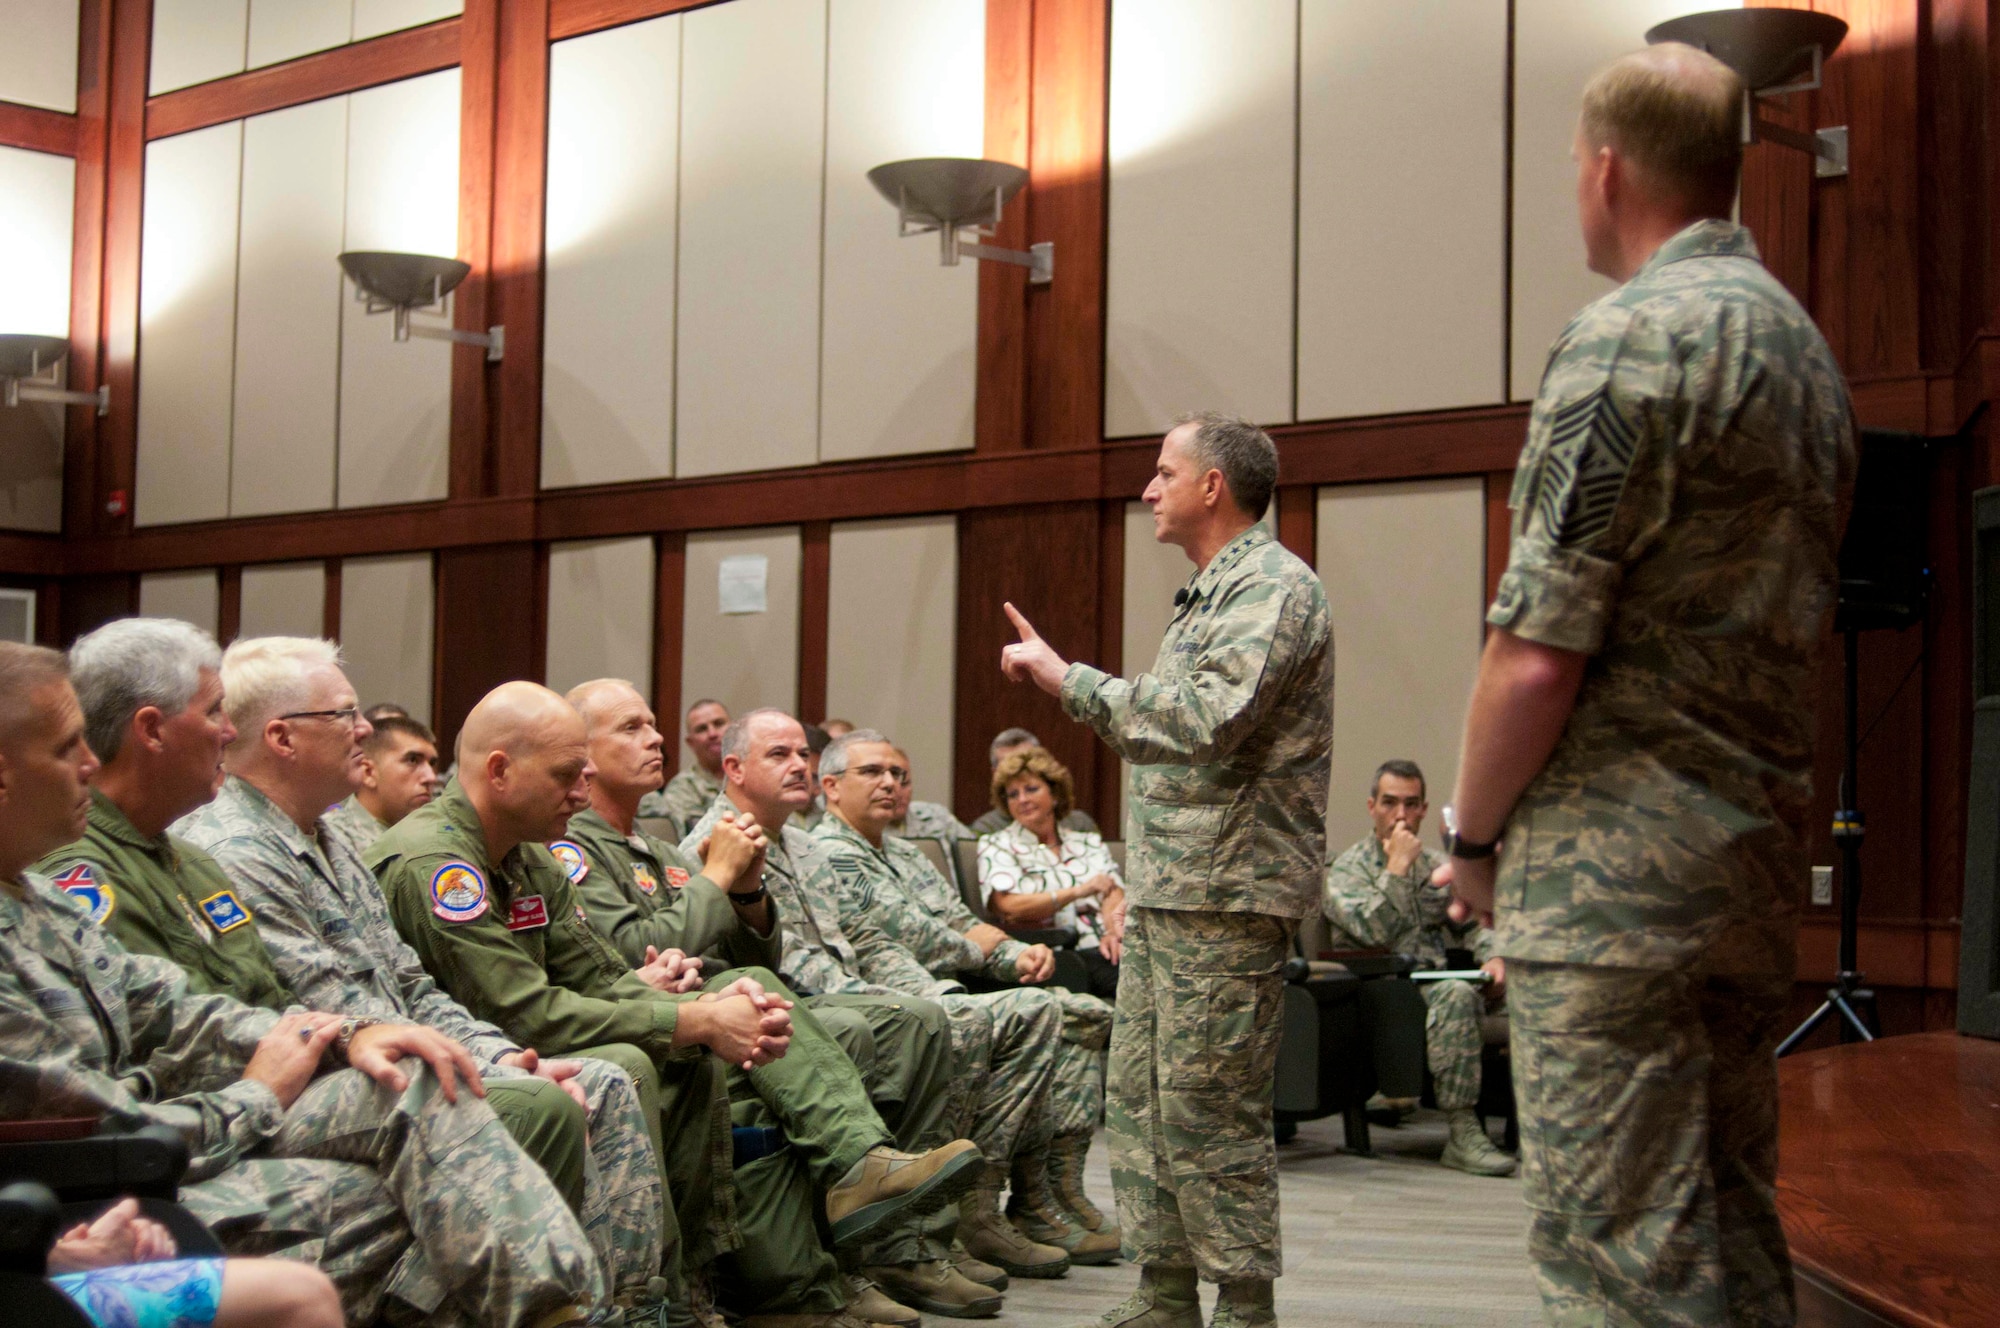 Gen. David L. Goldfein, Chief of Staff of the Air Force, and Chief Master Sgt. James A. Cody, Chief Master Sgt. of the Air Force, address Airmen of the 187th Fighter Wing during an all-call July 19, 2016 at the Montgomery Regional Air National Guard Base. The visit was a chance for Goldfein and Cody to see the wing's mission, meet Airmen, and thank them for their service. (U.S. Air National Guard photo by Staff Sgt. Jared Rand)